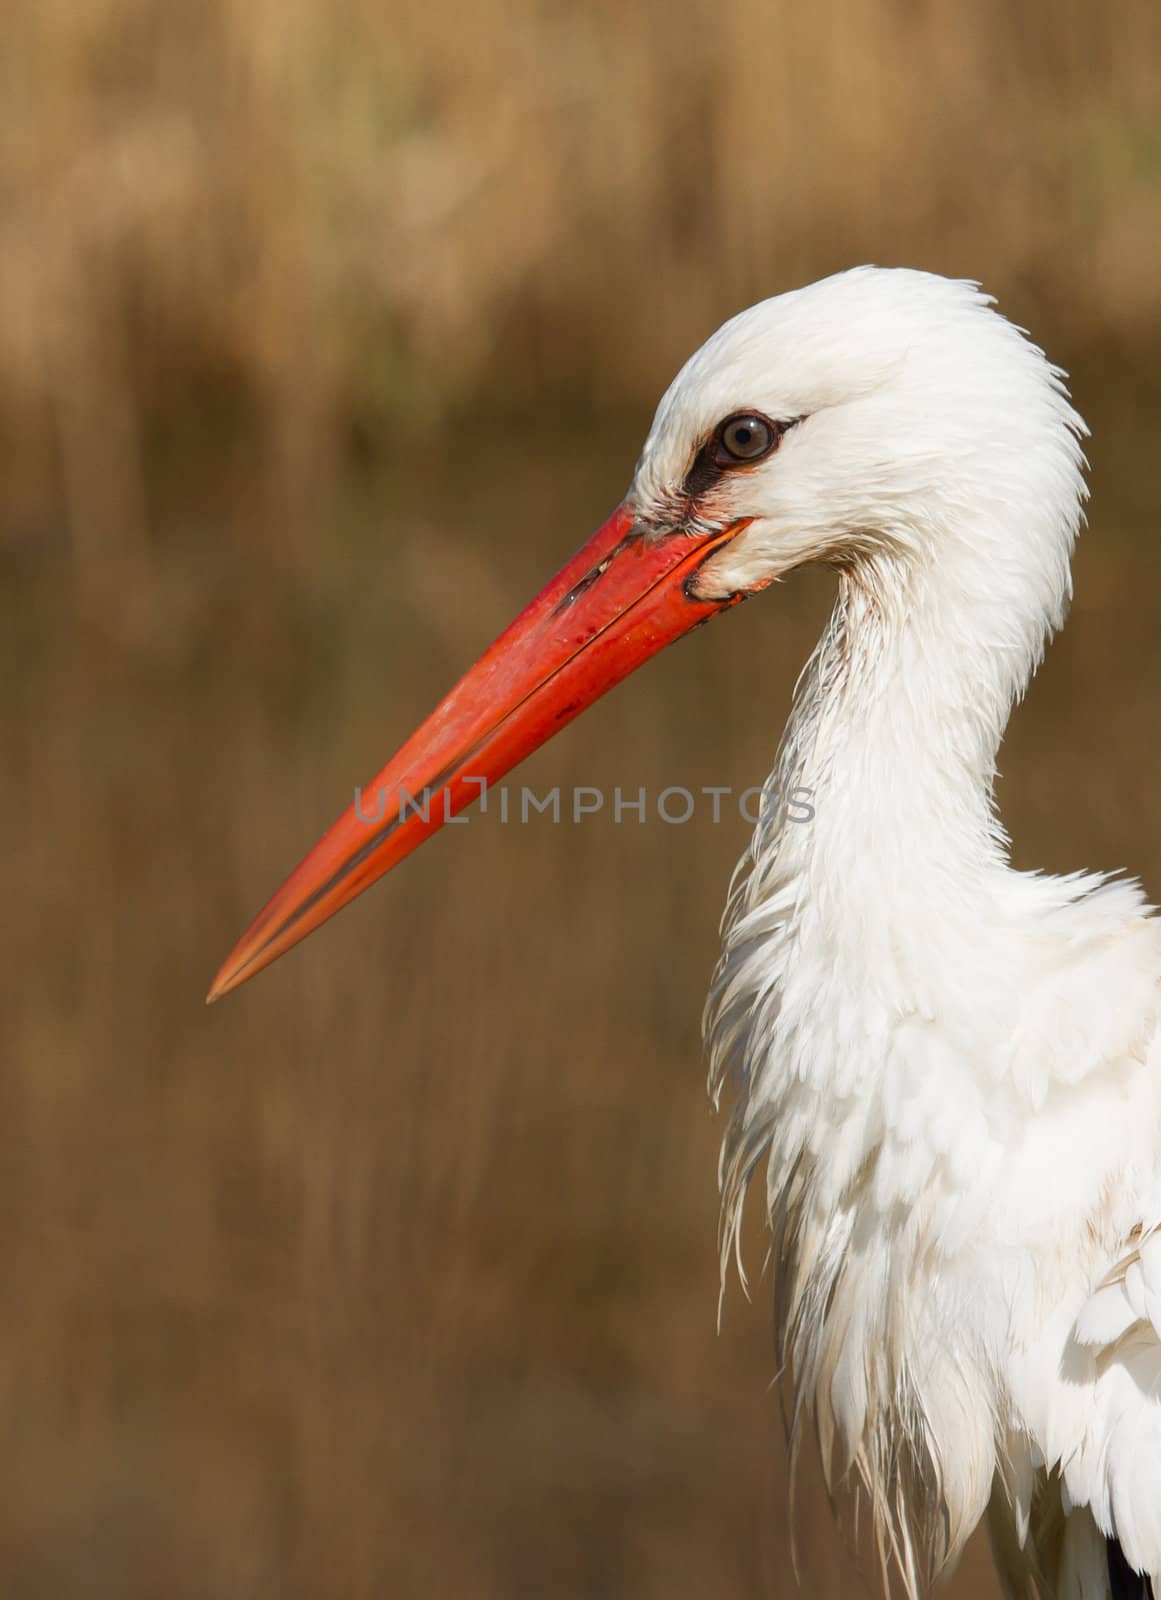 Close-up of a stork by michaklootwijk